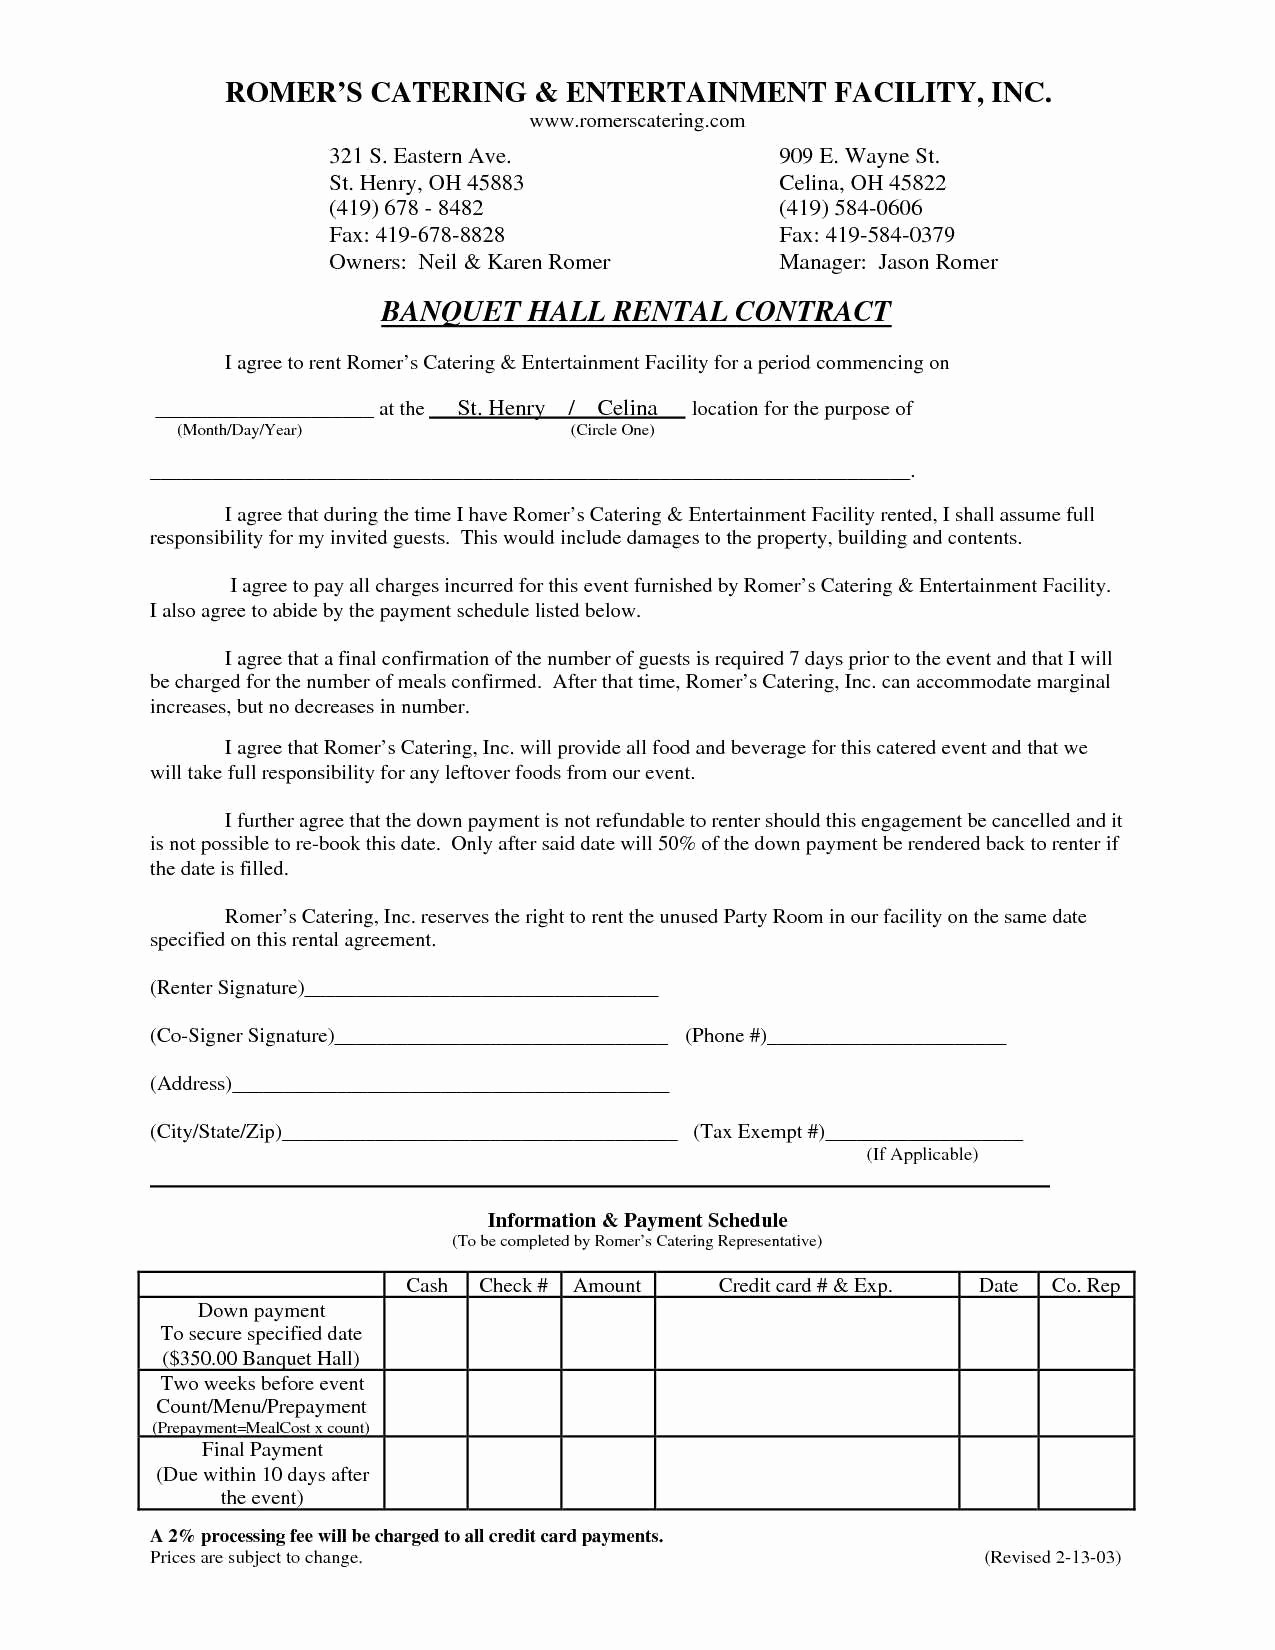 Private Label Agreement Template Best Of Pany Contract Document